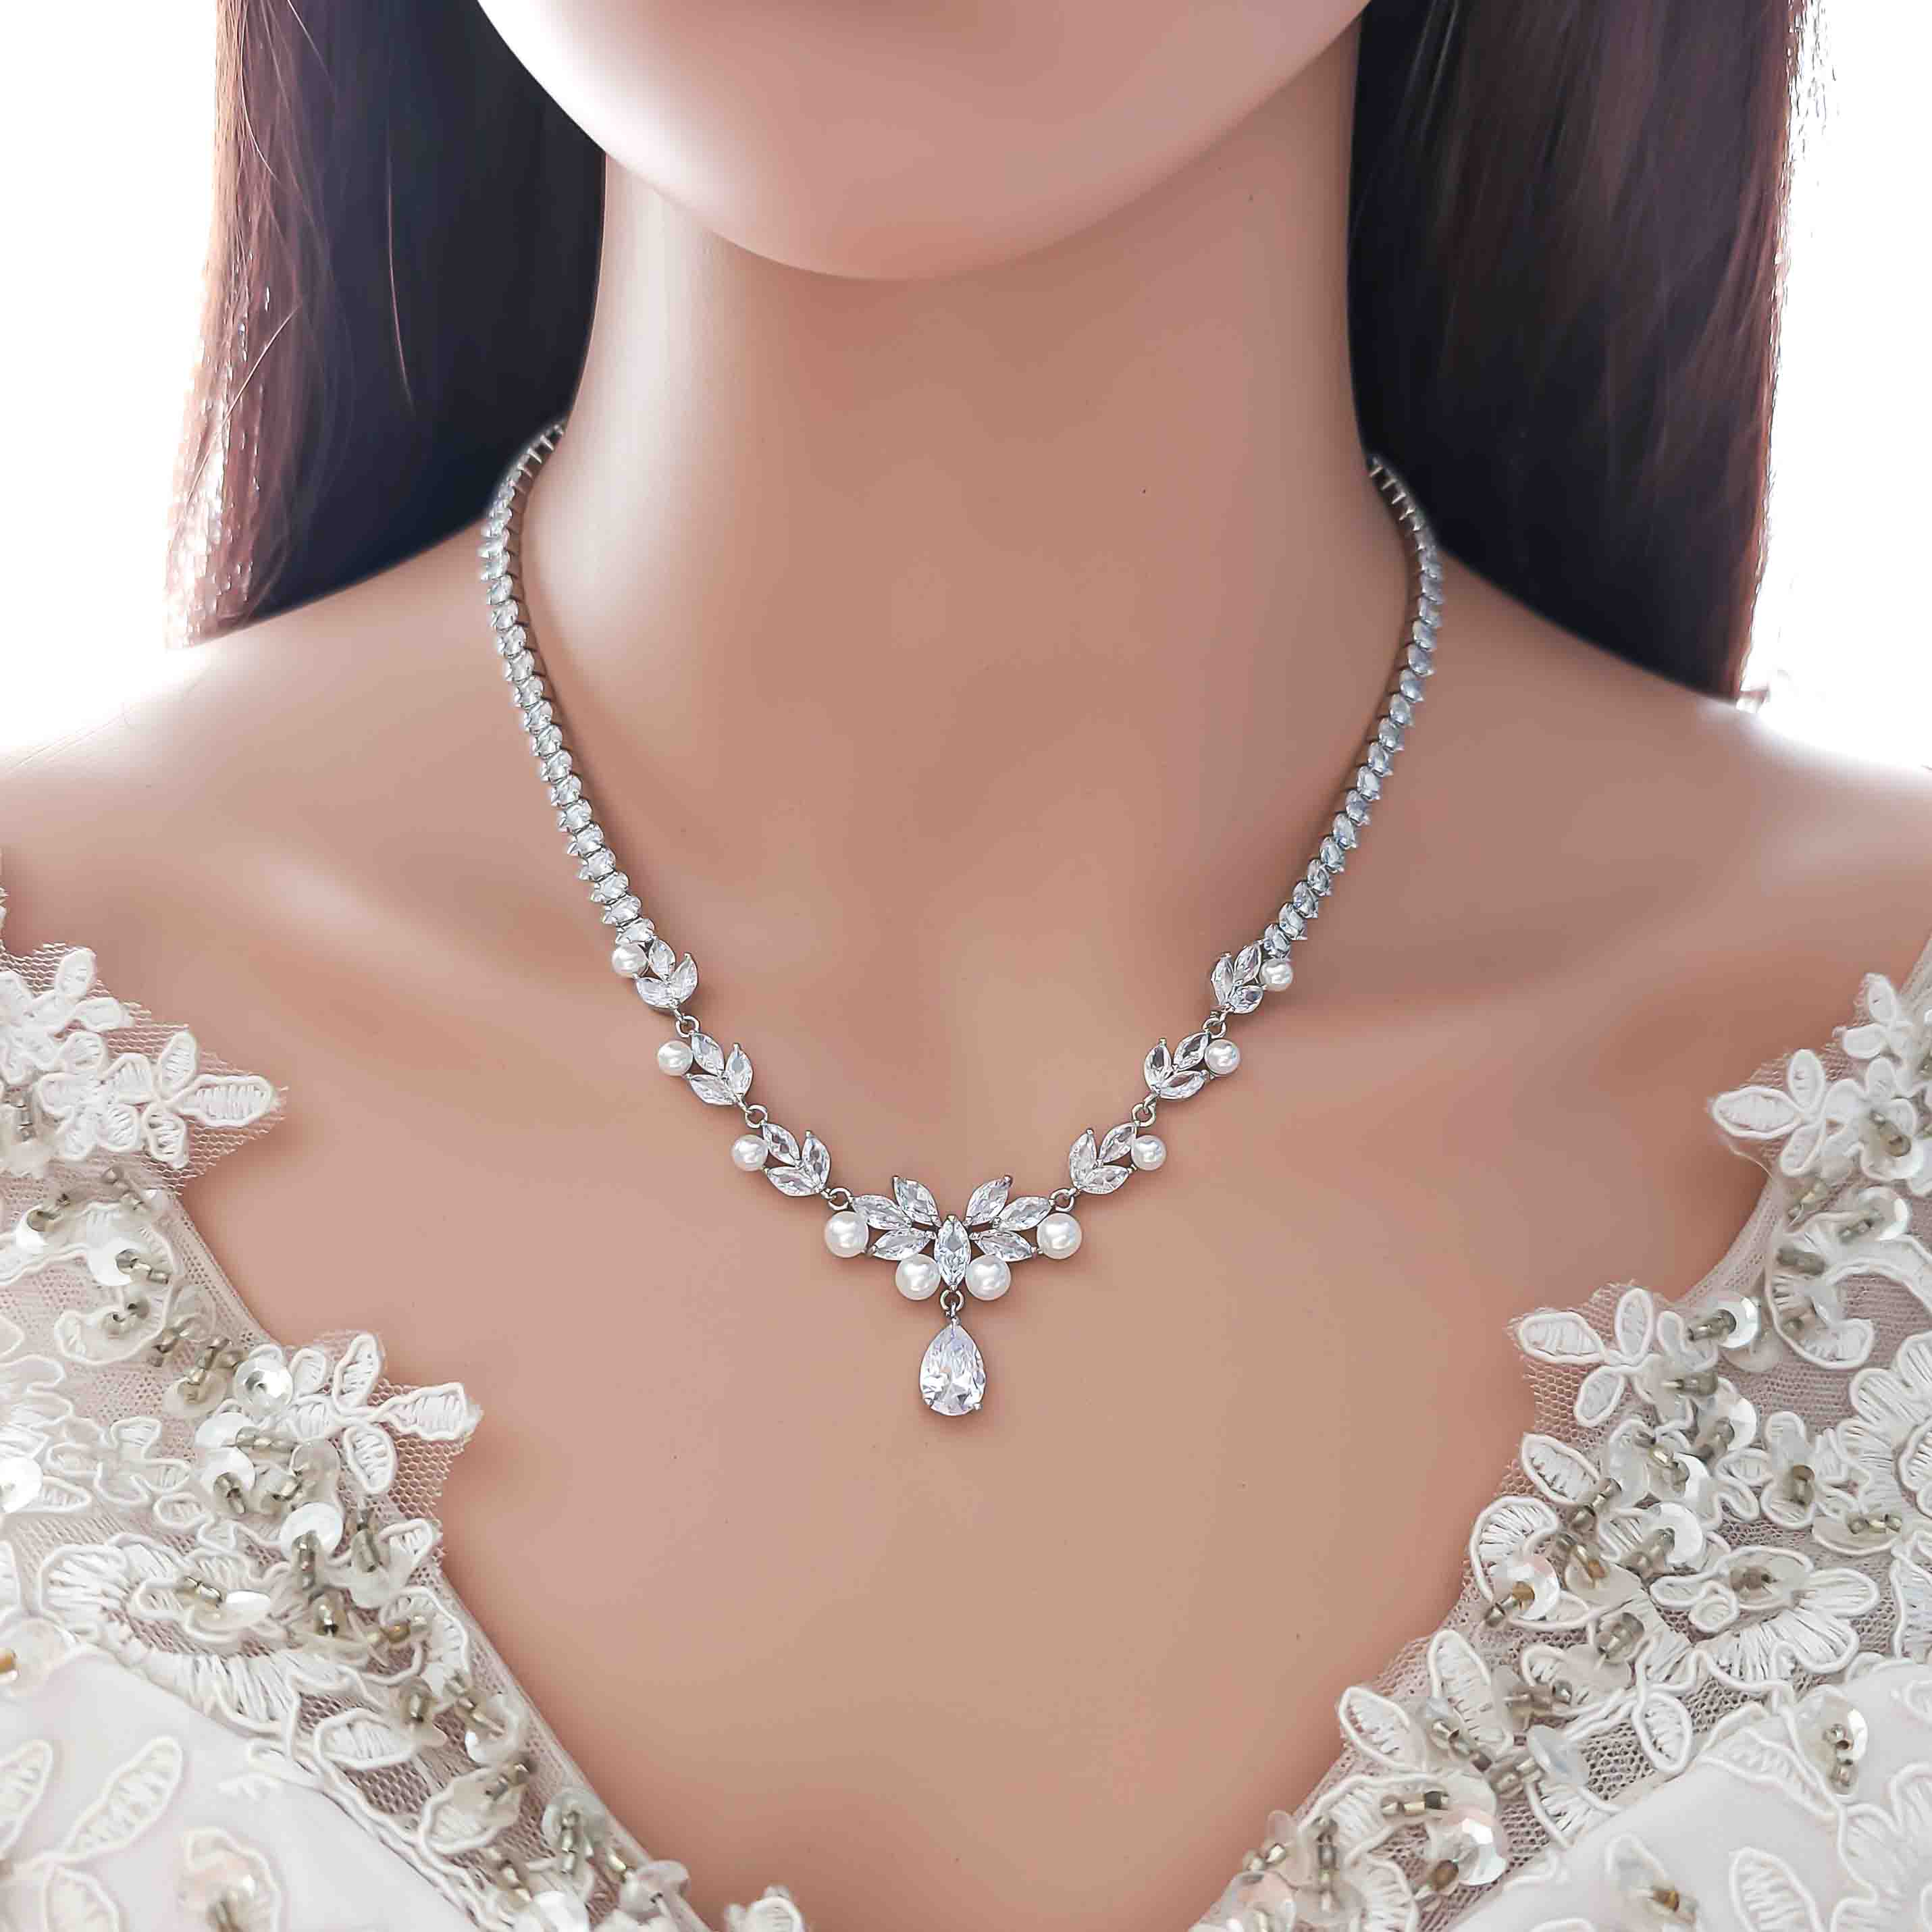 How to match a pearl necklace with earrings - Quora